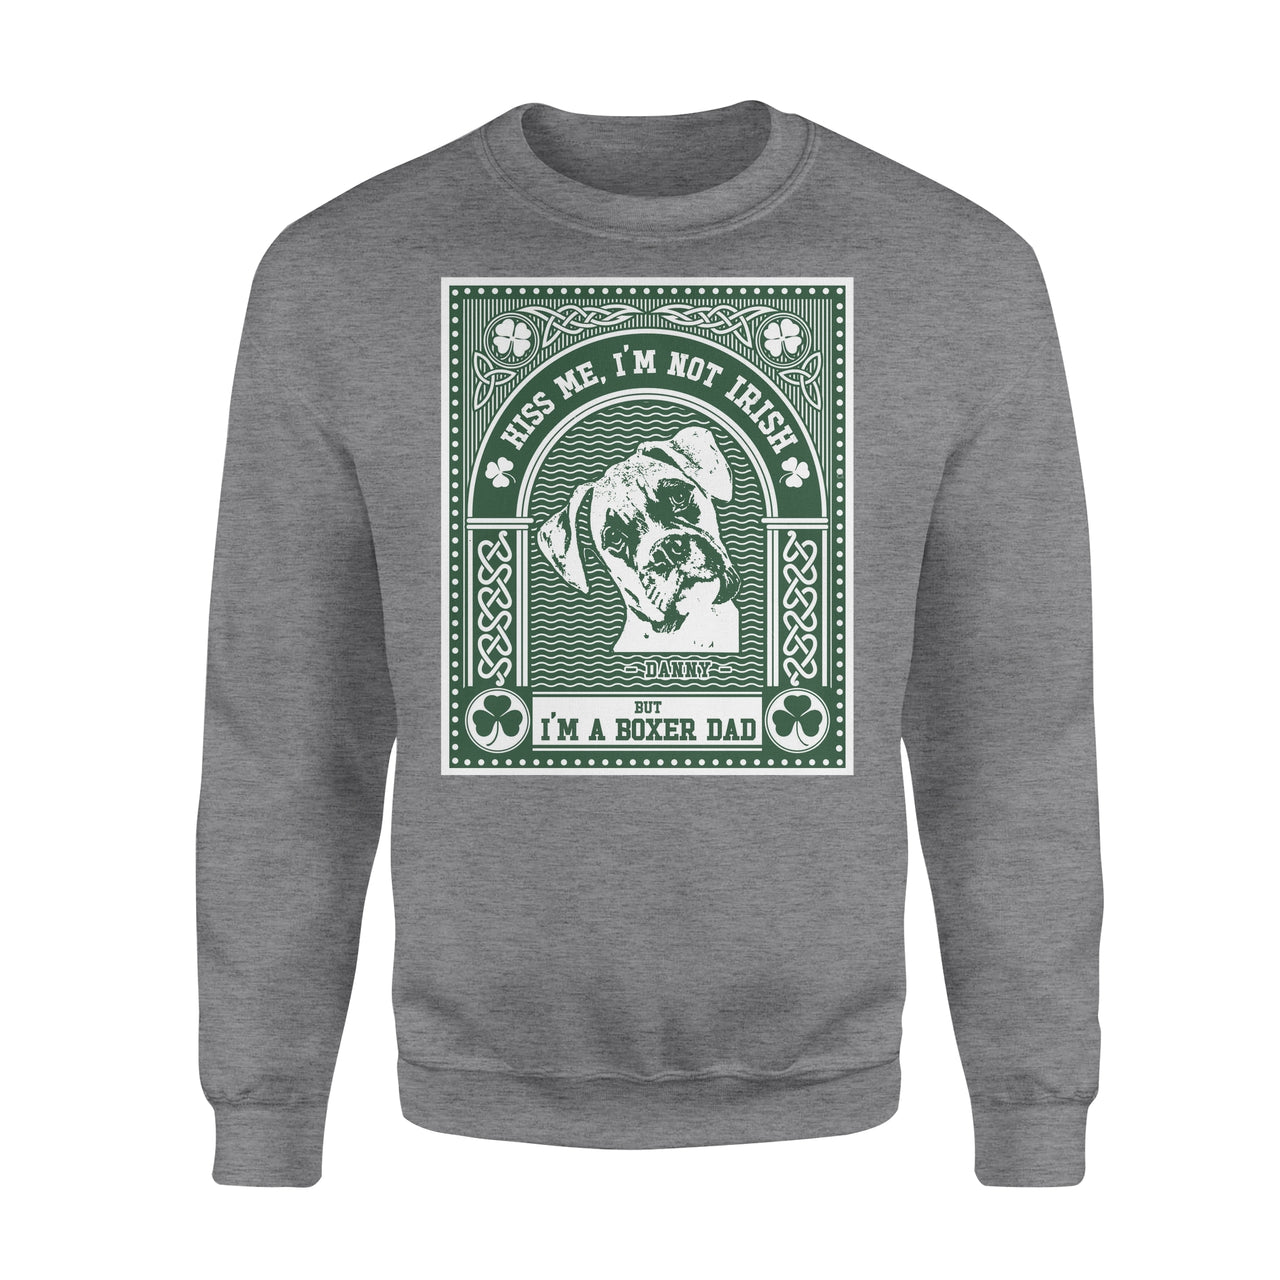 Personalized St Patrick Dog Gift Idea - Kiss Me, I'm Not Irish But I'm A Boxer Dad For Dog Dad - Standard Crew Neck Sweatshirt